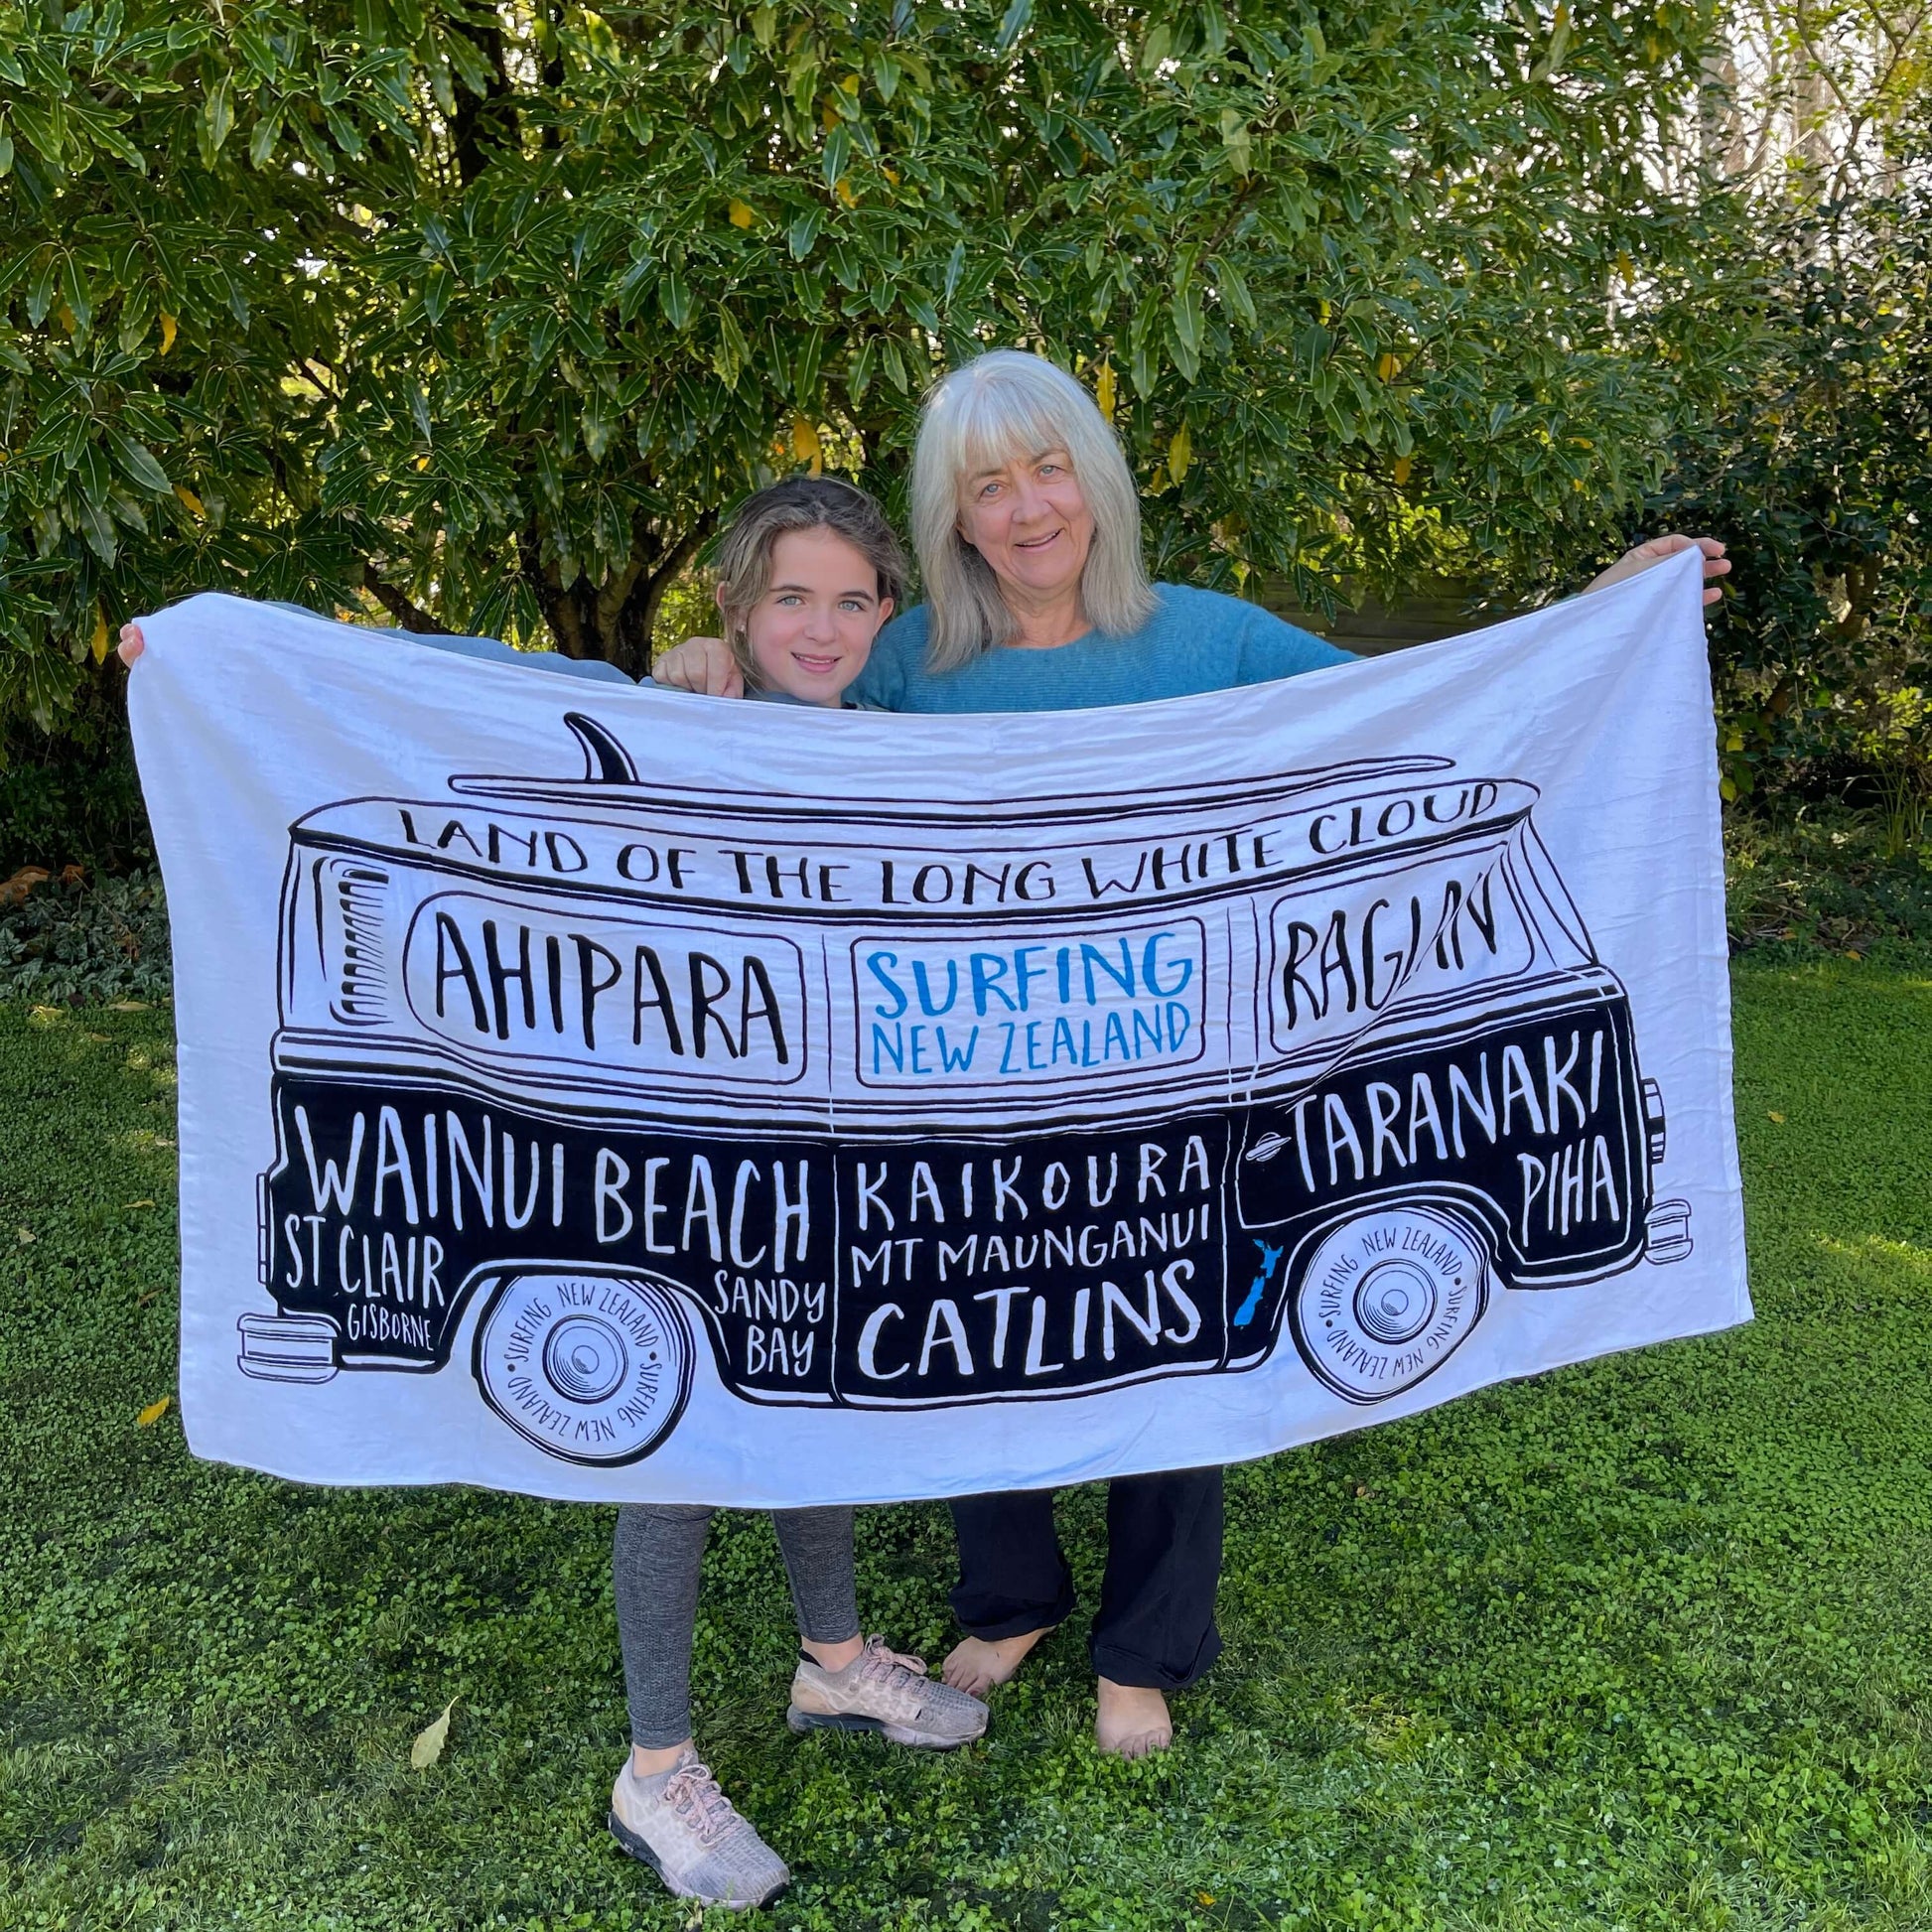 Grandmother & Grandaughter holding a large white beach towel with a Kombi van and names of New Zealand surf locations on it.